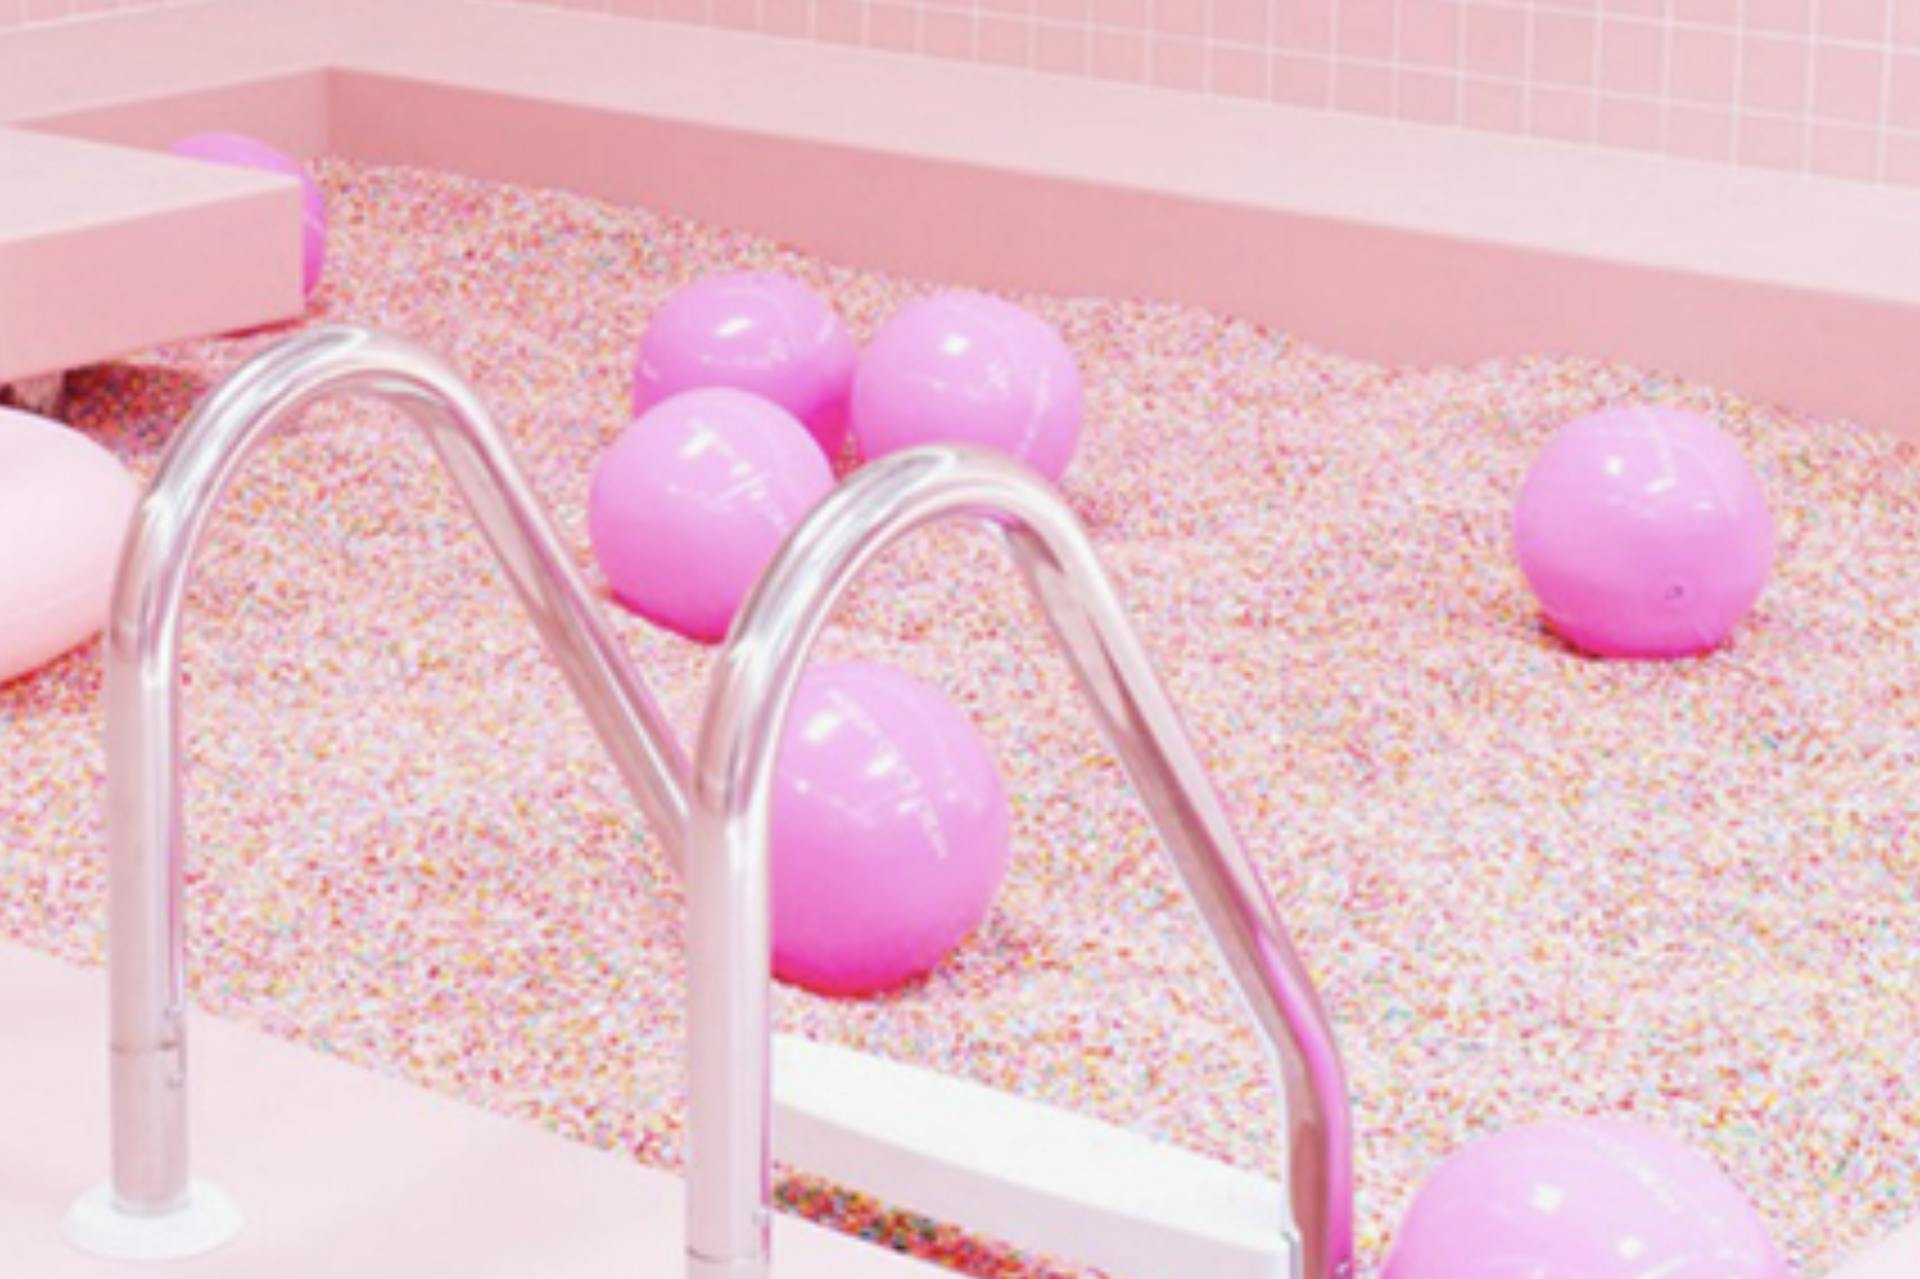 Photo of a pink pool filled with konfetti and balls